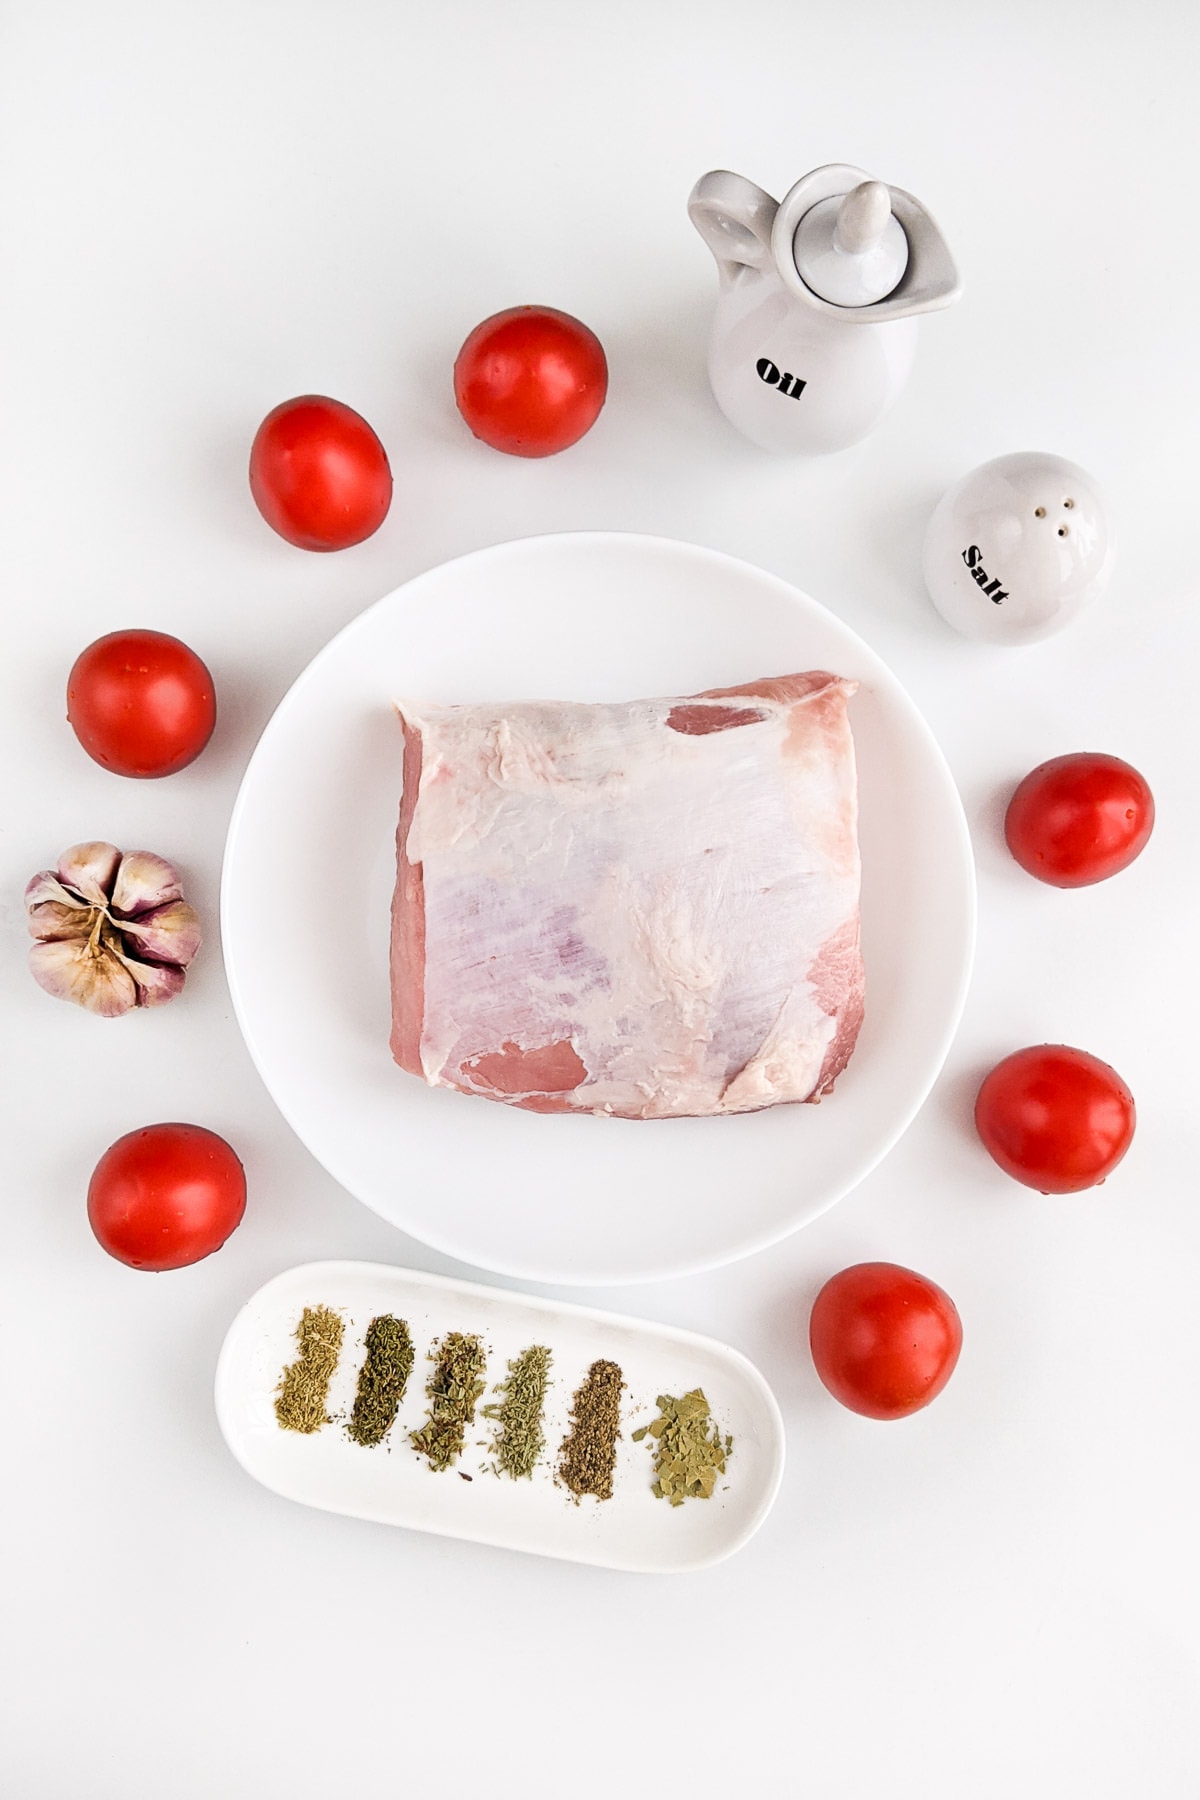 Pork loin with tomatoes, garlic and spices on white table.